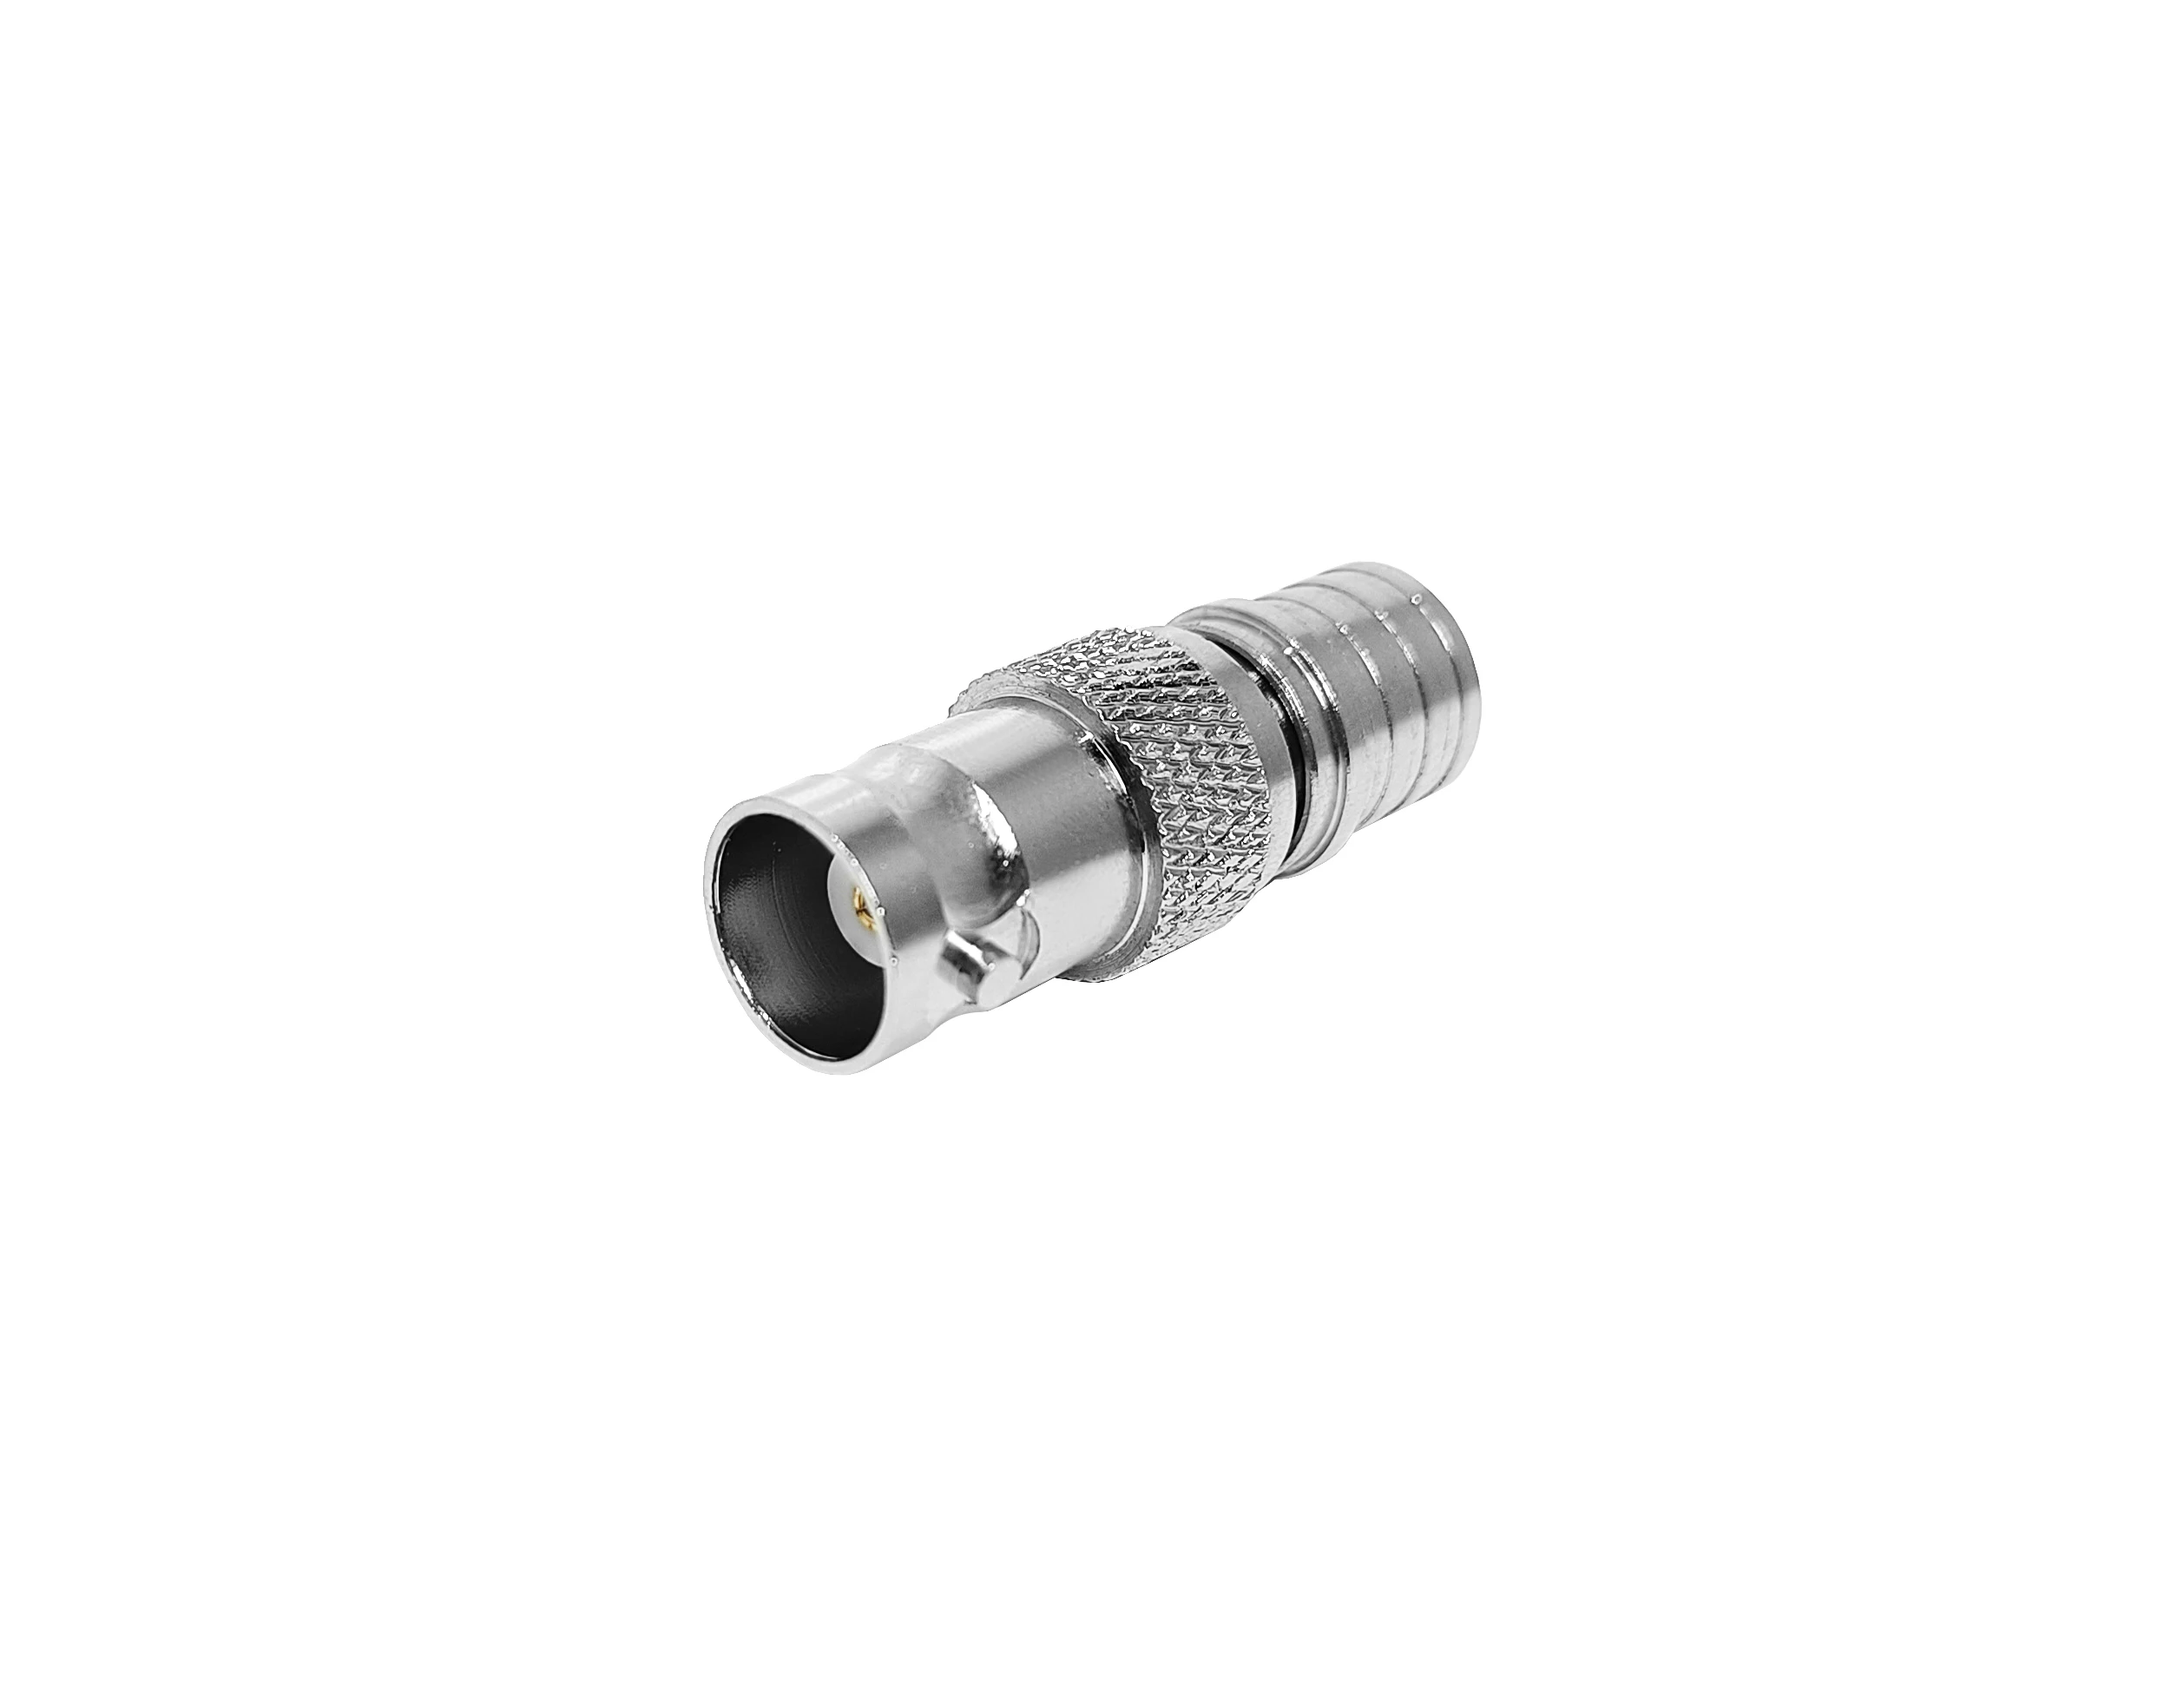 Nickel Plated Adapter BNC Connector female To QMA Male Adapter details